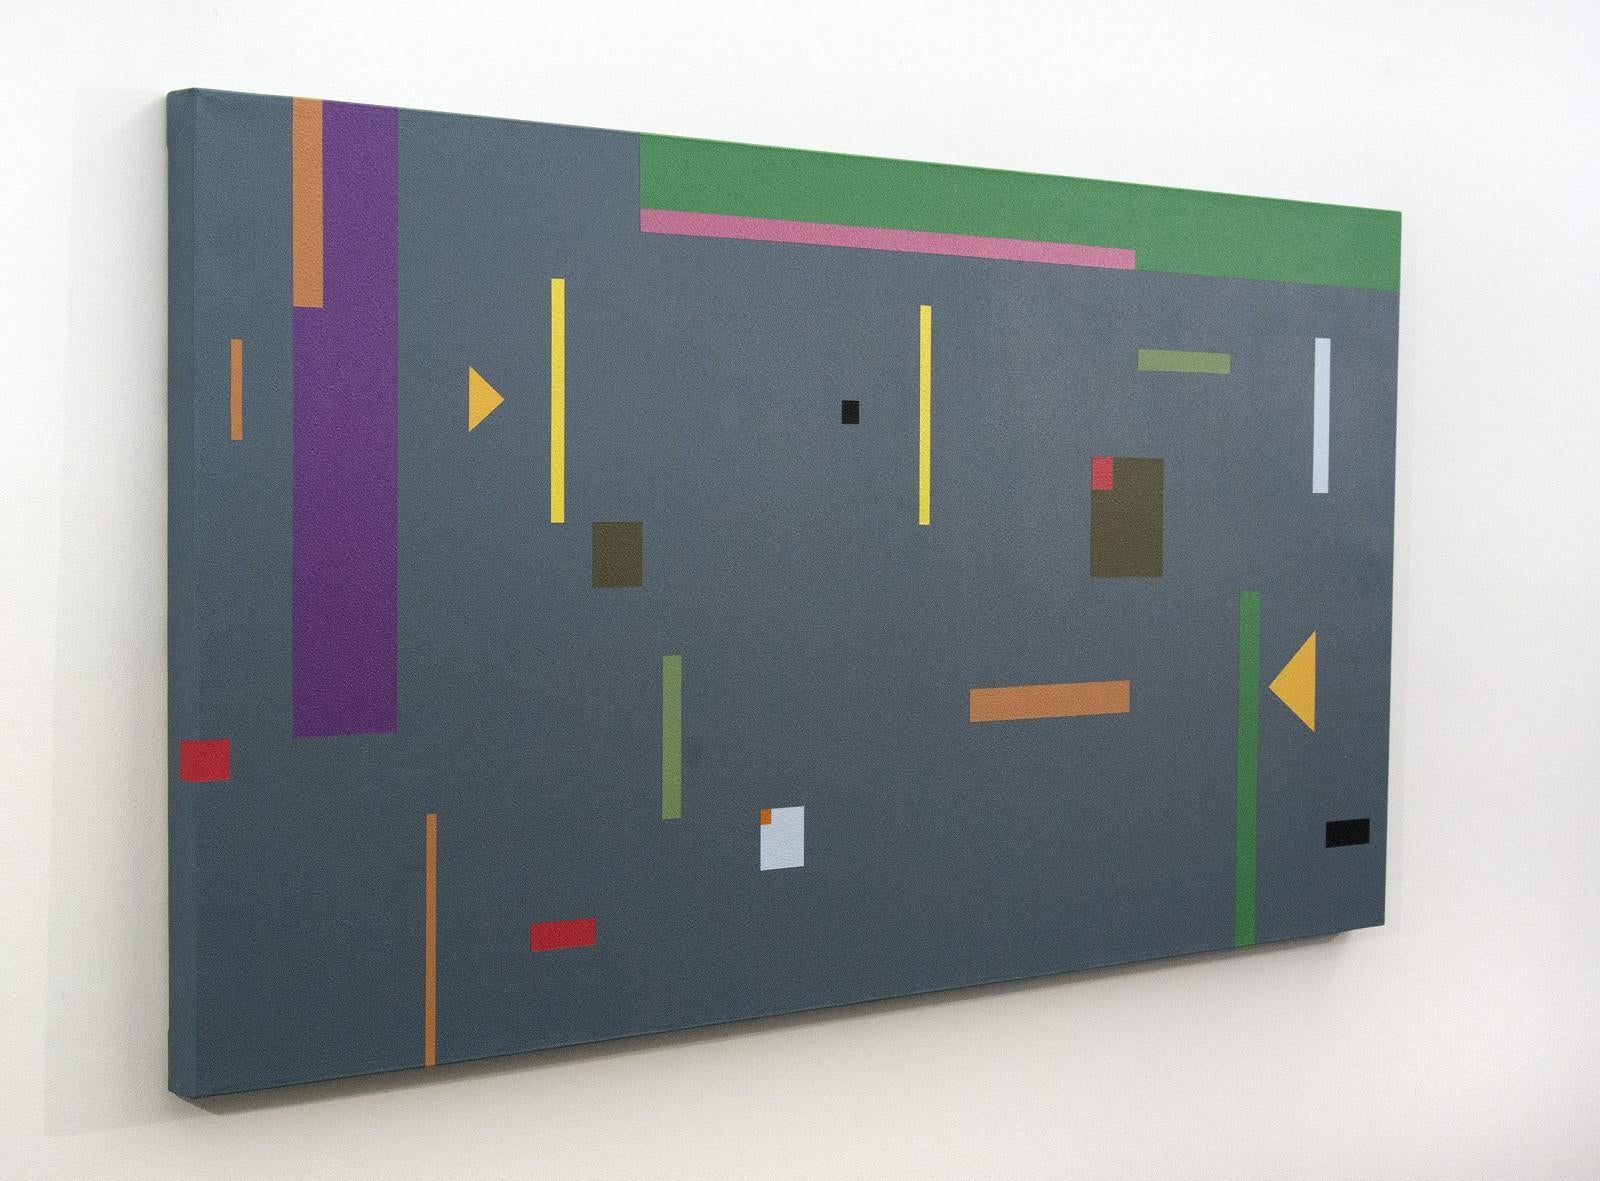 Lyrical, geometric shapes in violet, pink, yellow, orange and green dance on a steel blue ground in this composition by Burton Kramer. 

Trained at Yale University (MFA), The Institute of Design at the Illinois Institute of Technology (BSc), The